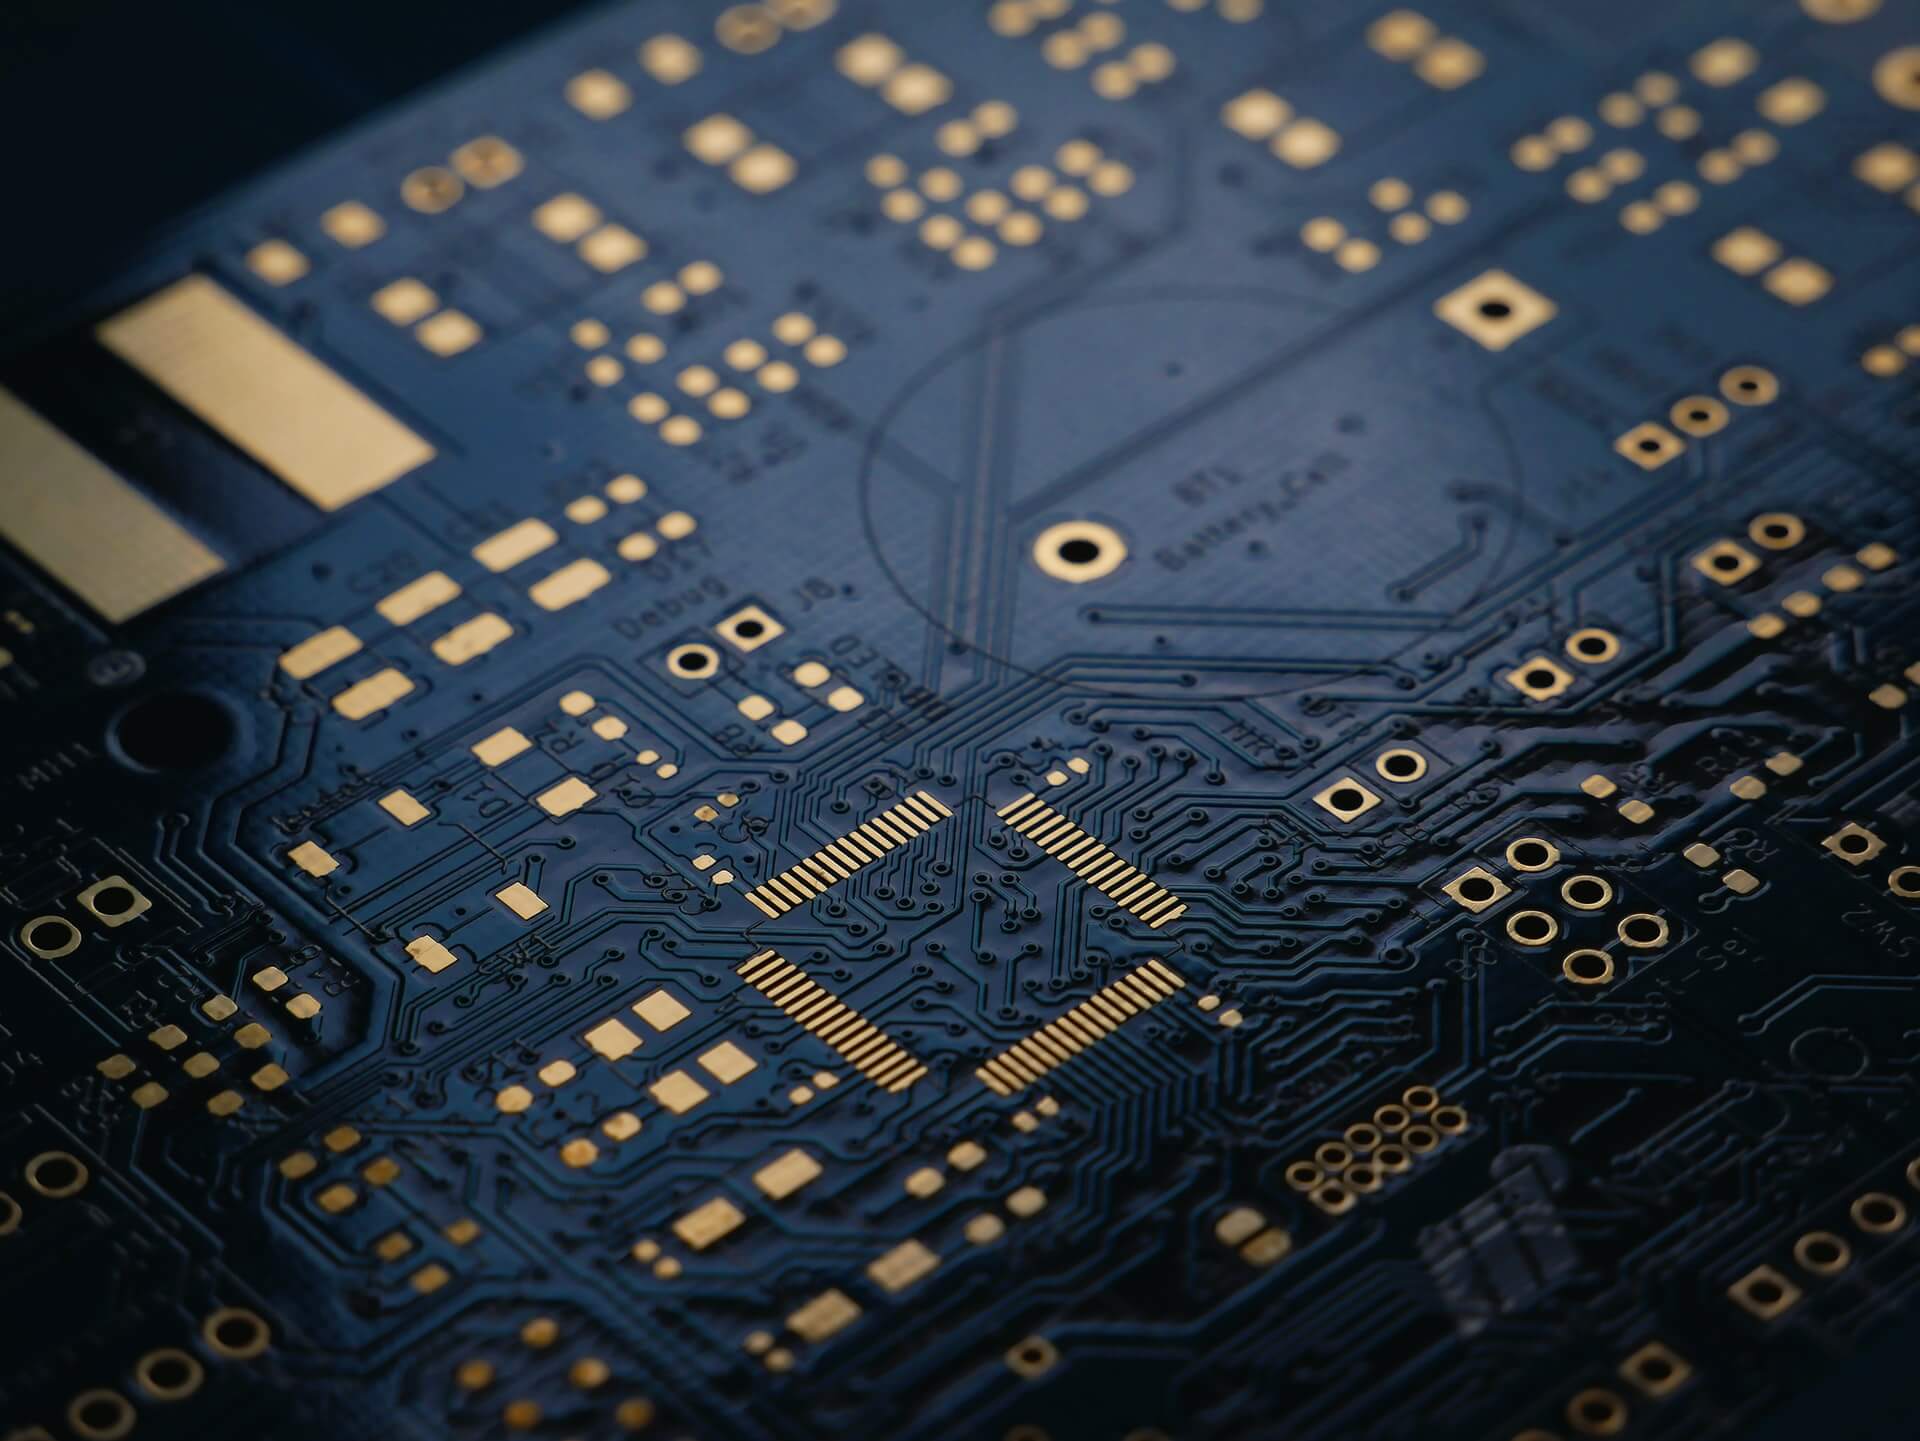 Printed circuit board with gold details